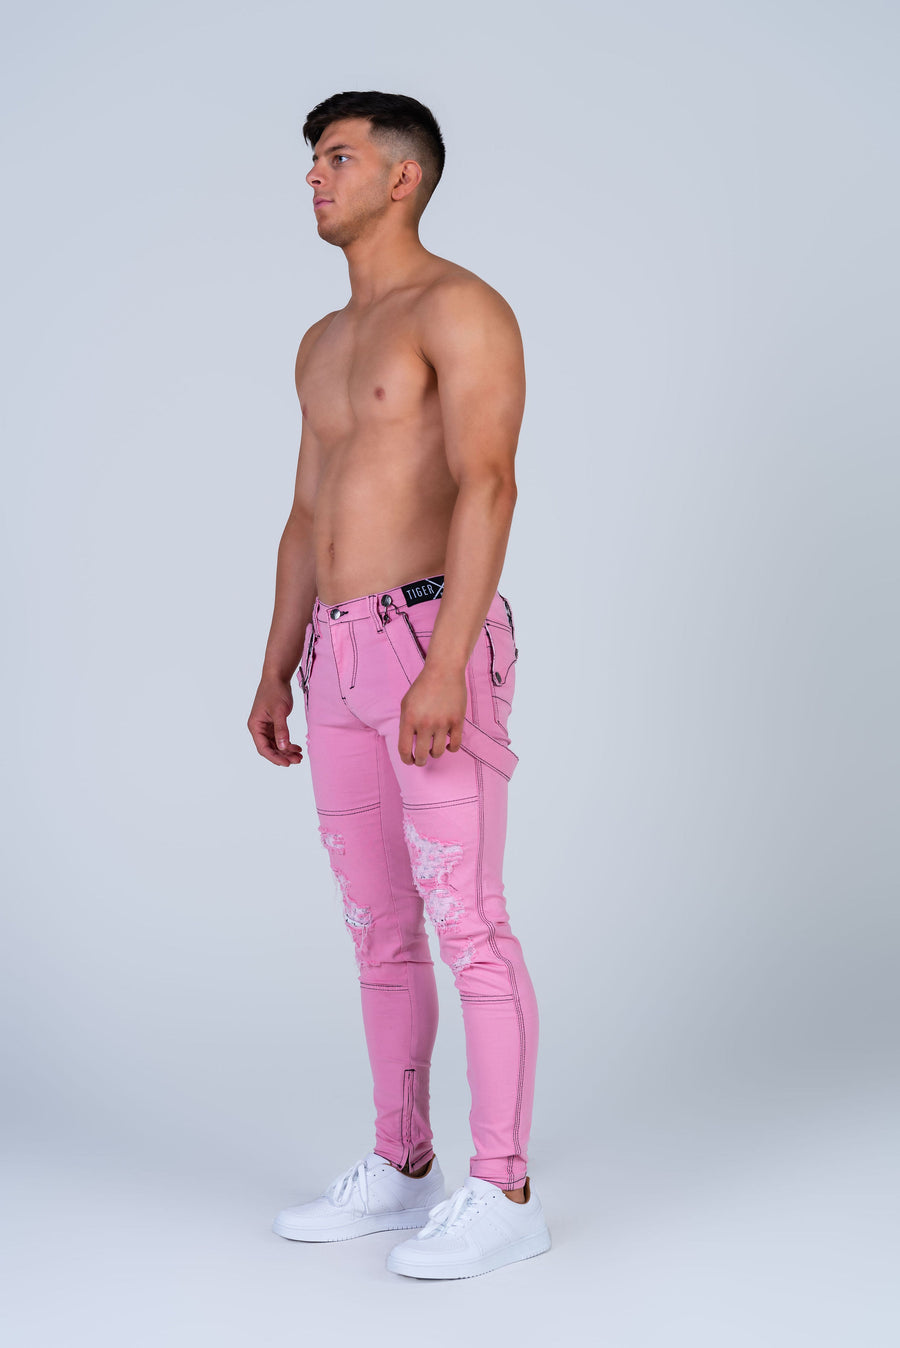 EARL PINK JEAN with Holes & Backing